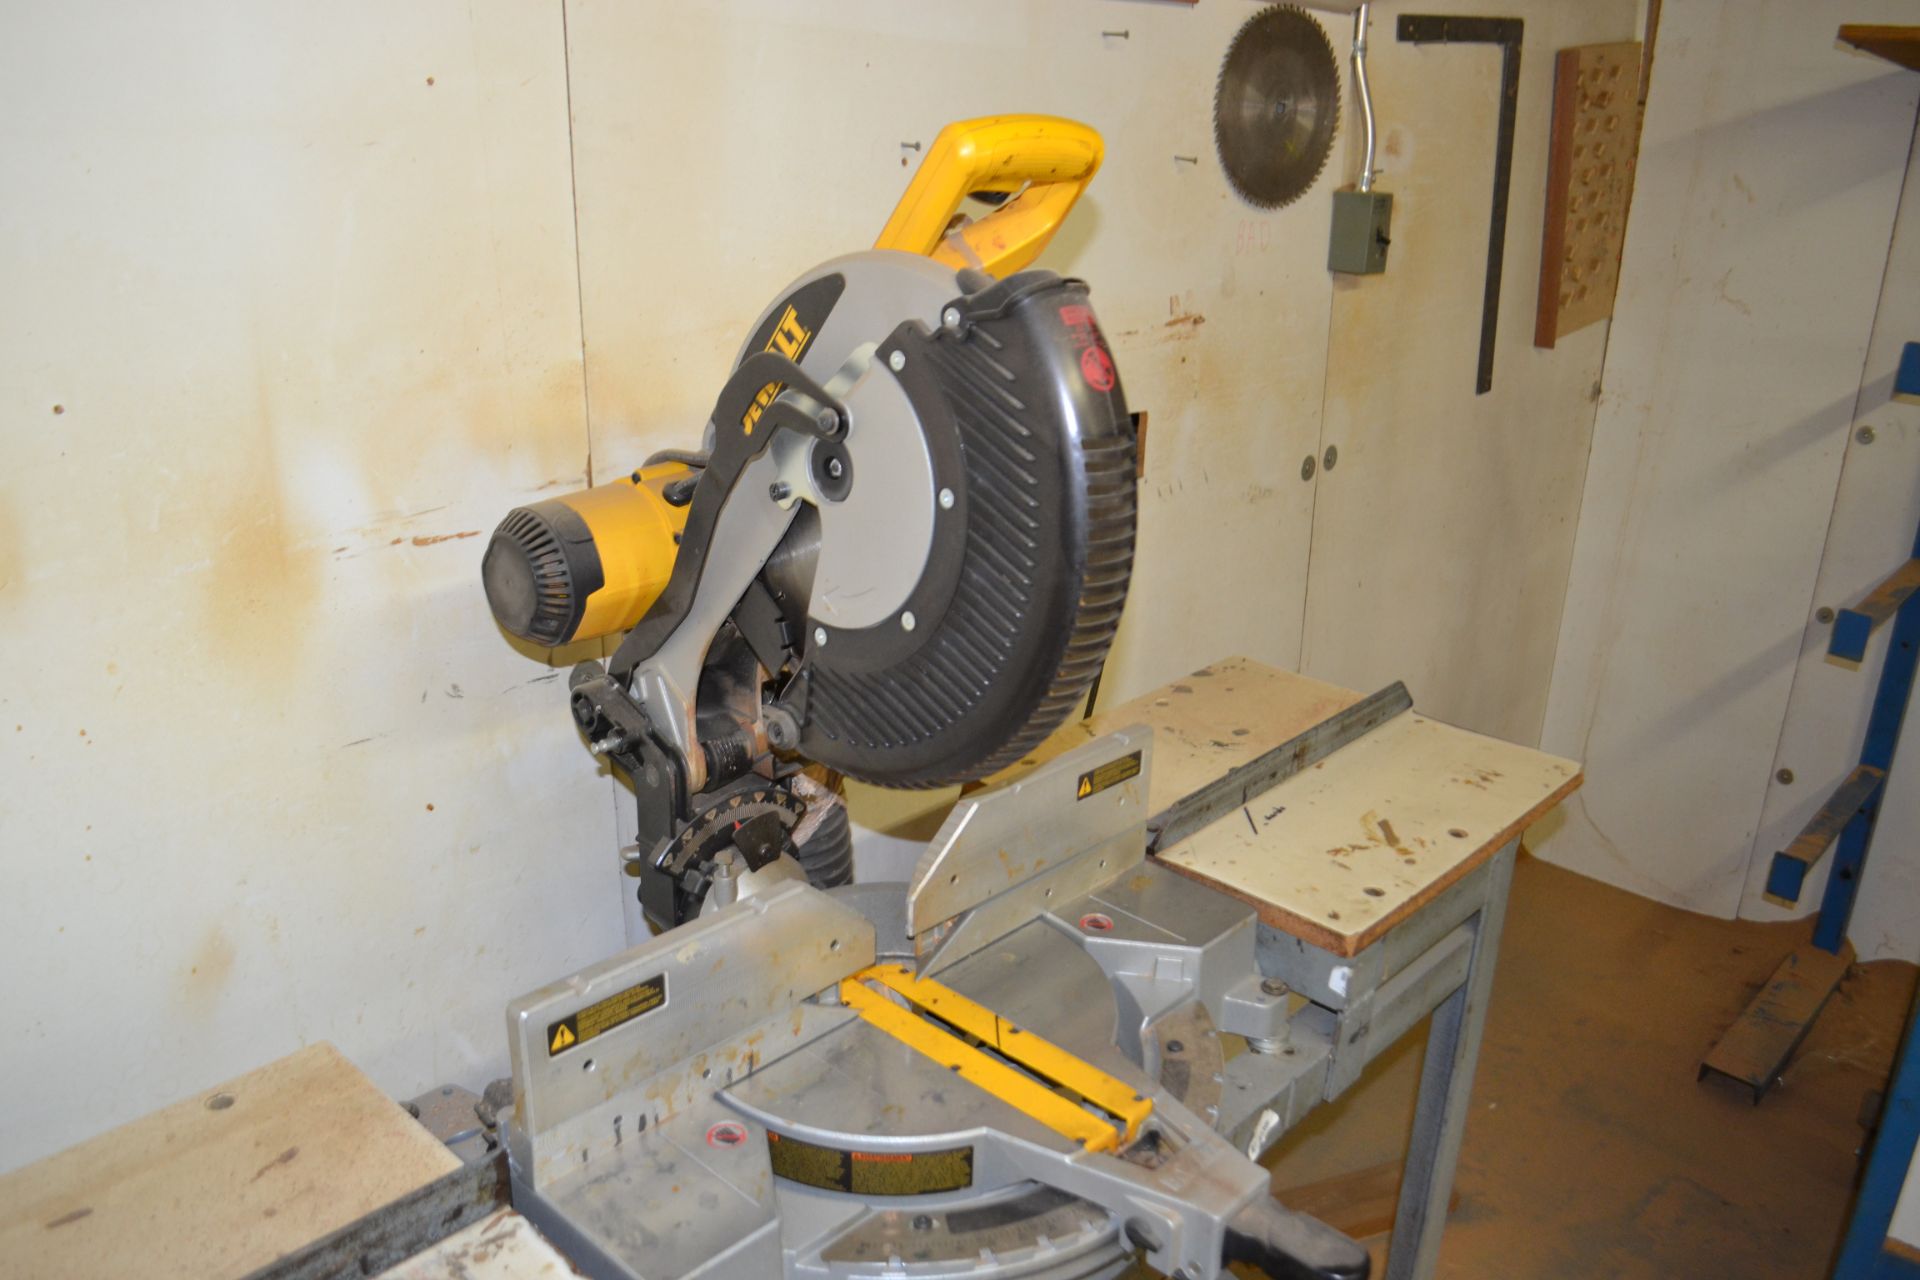 DeWalt DW716 Type 1 12" Compound Miter Saw mounted on 9' x 16" Table - Image 2 of 2